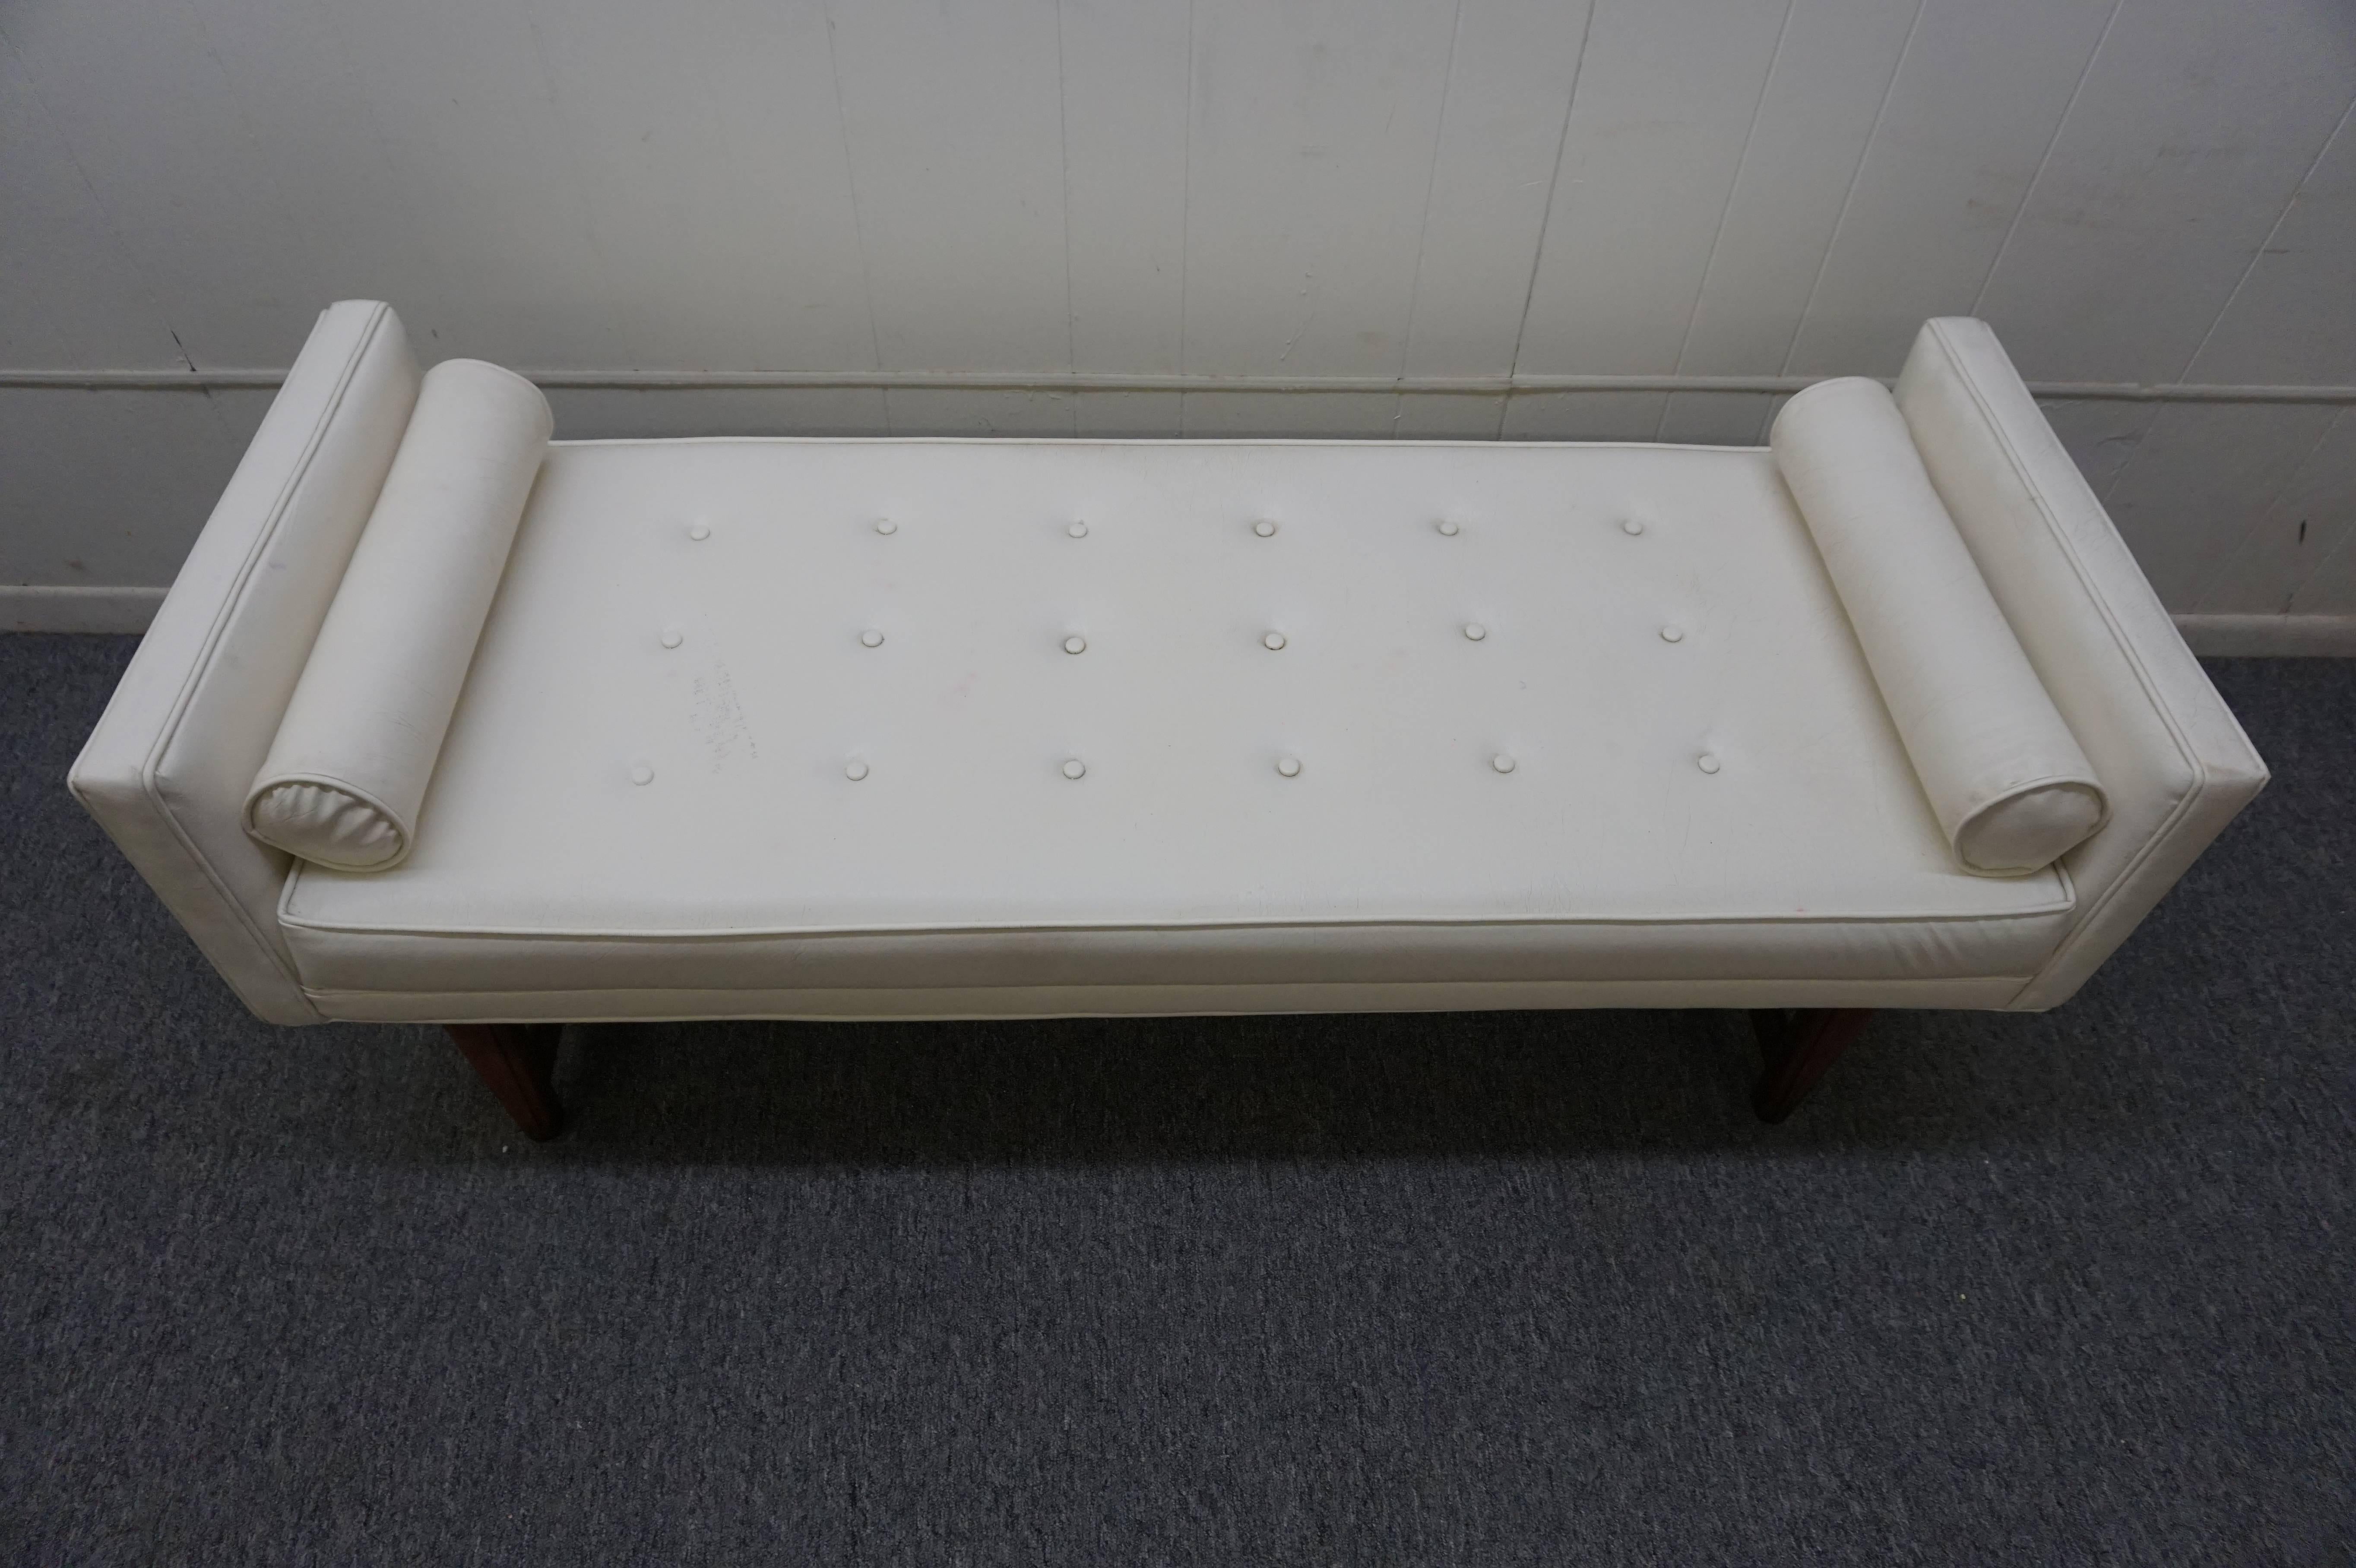 Handsome American Mid-Century Modern upholstered bench with lovely walnut base. We love the high sides with cylinder pillows and button tufted seat. Great piece used at the foot of the bed or in entry hall.